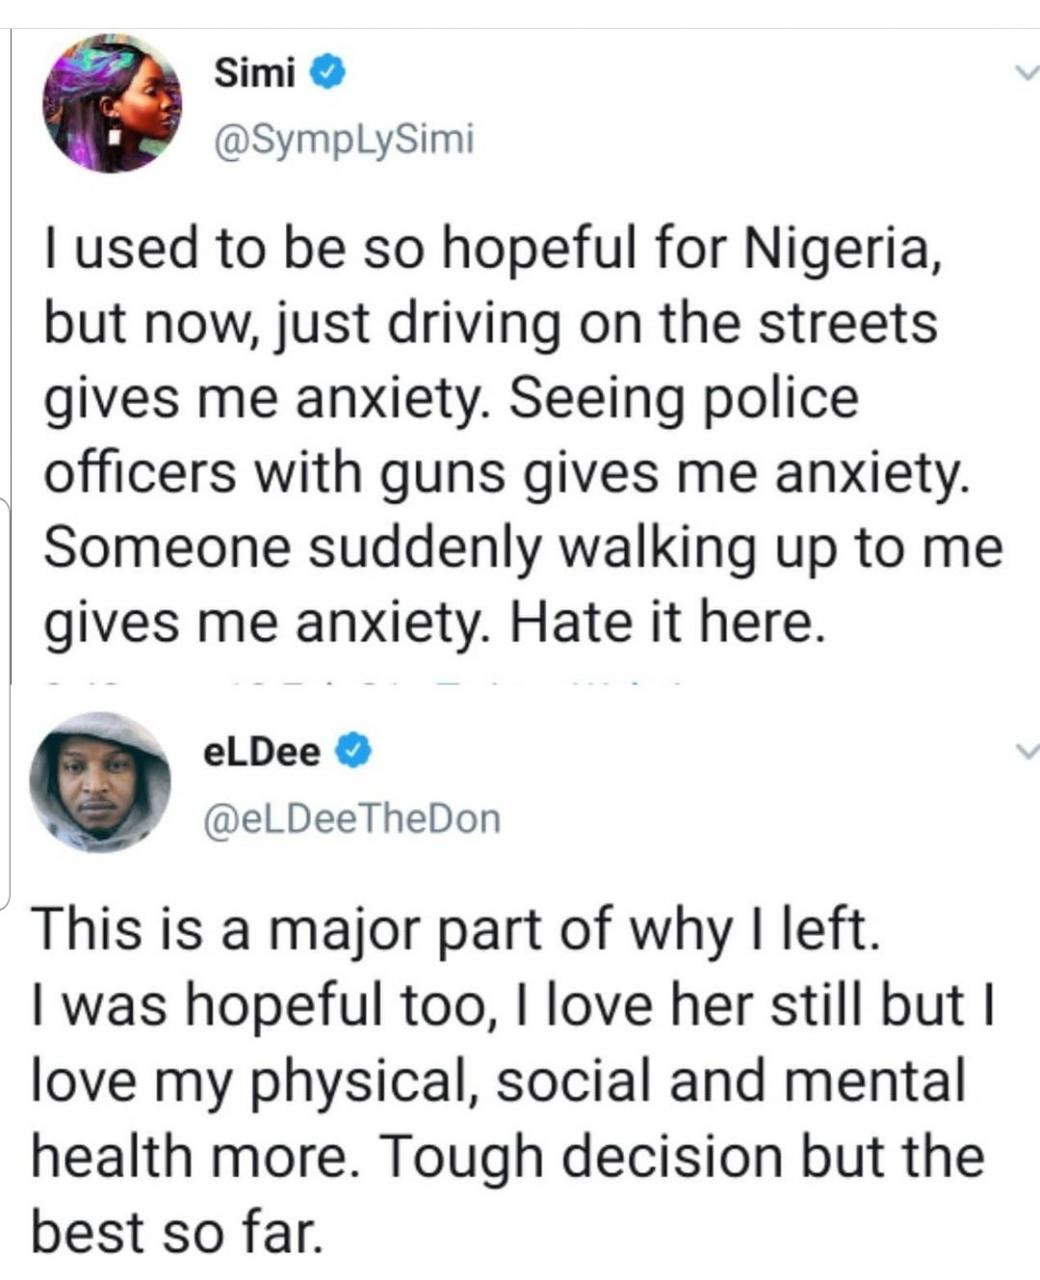 Nigerian rapper, Eldee explains why he relocated to the U.S.